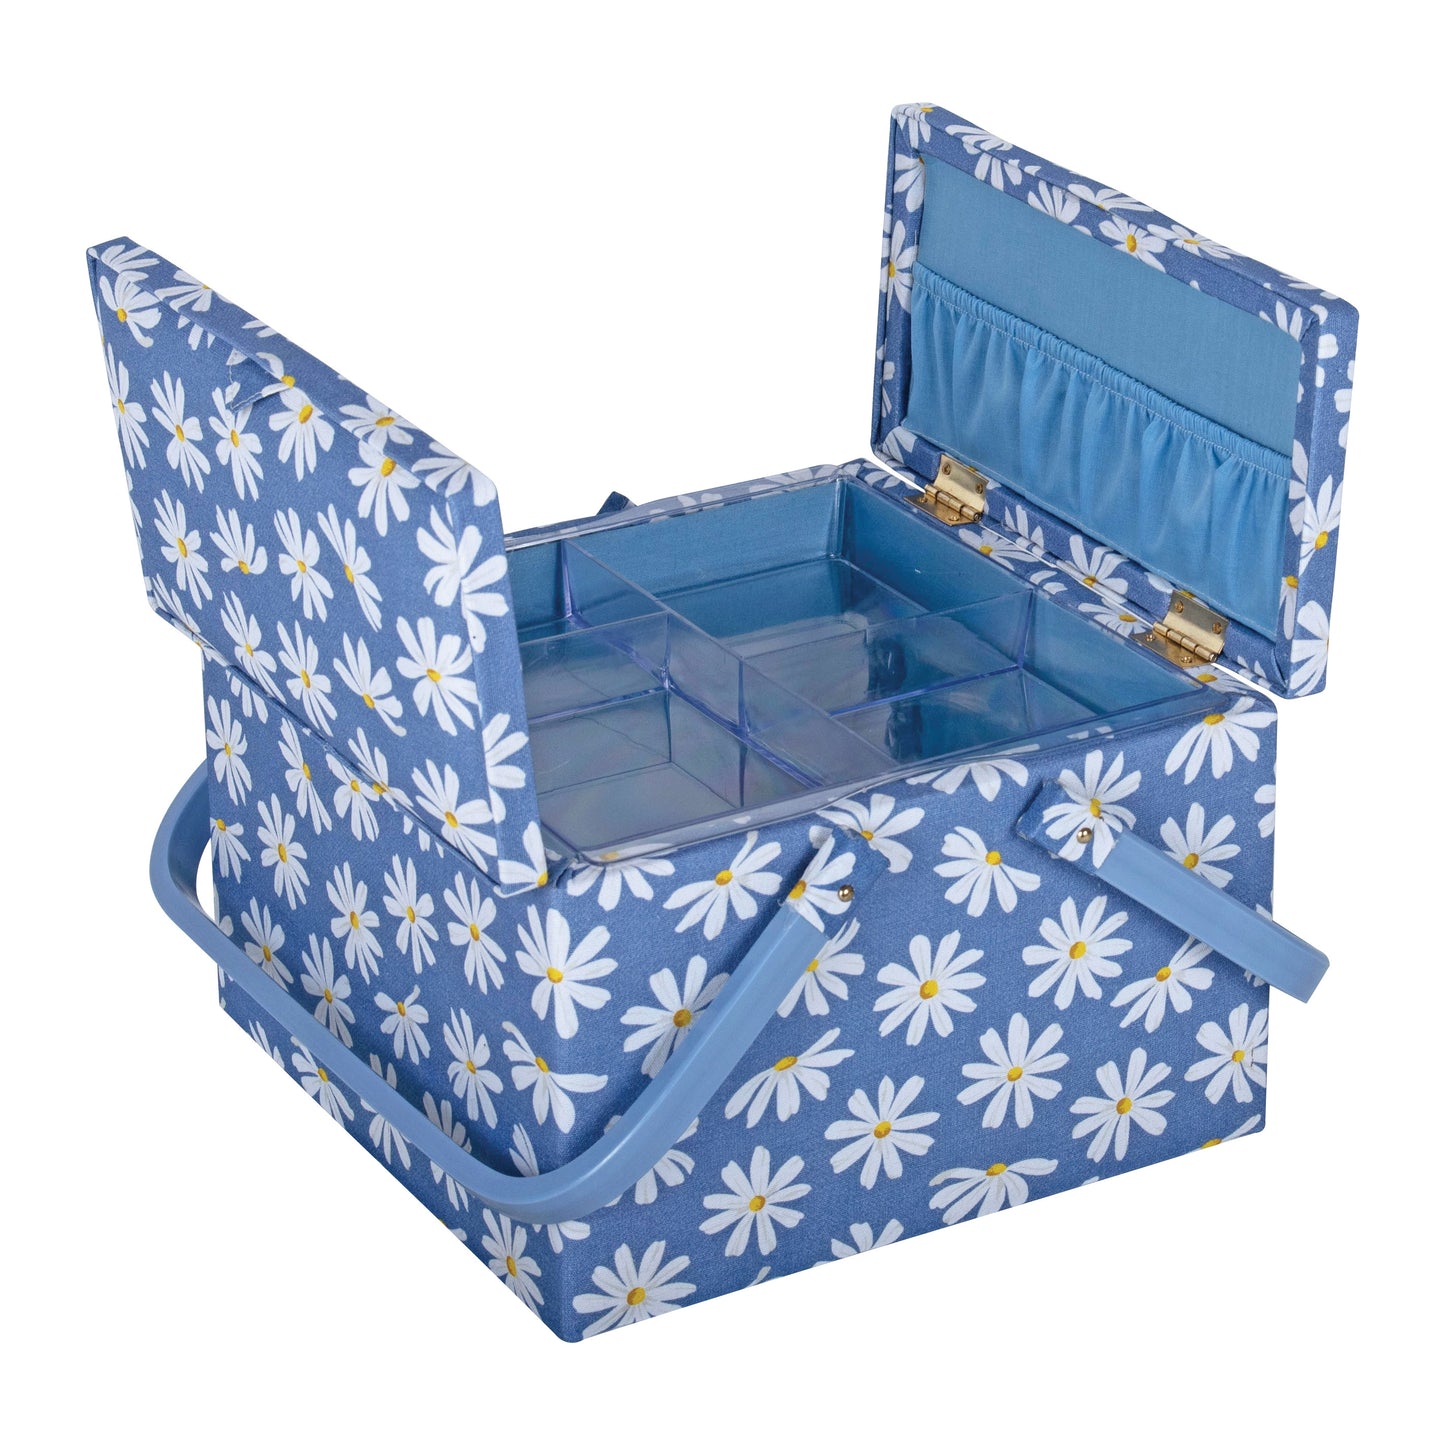 Hobby Gift Sewing Box Large Twin Lid Square Denim Daisies